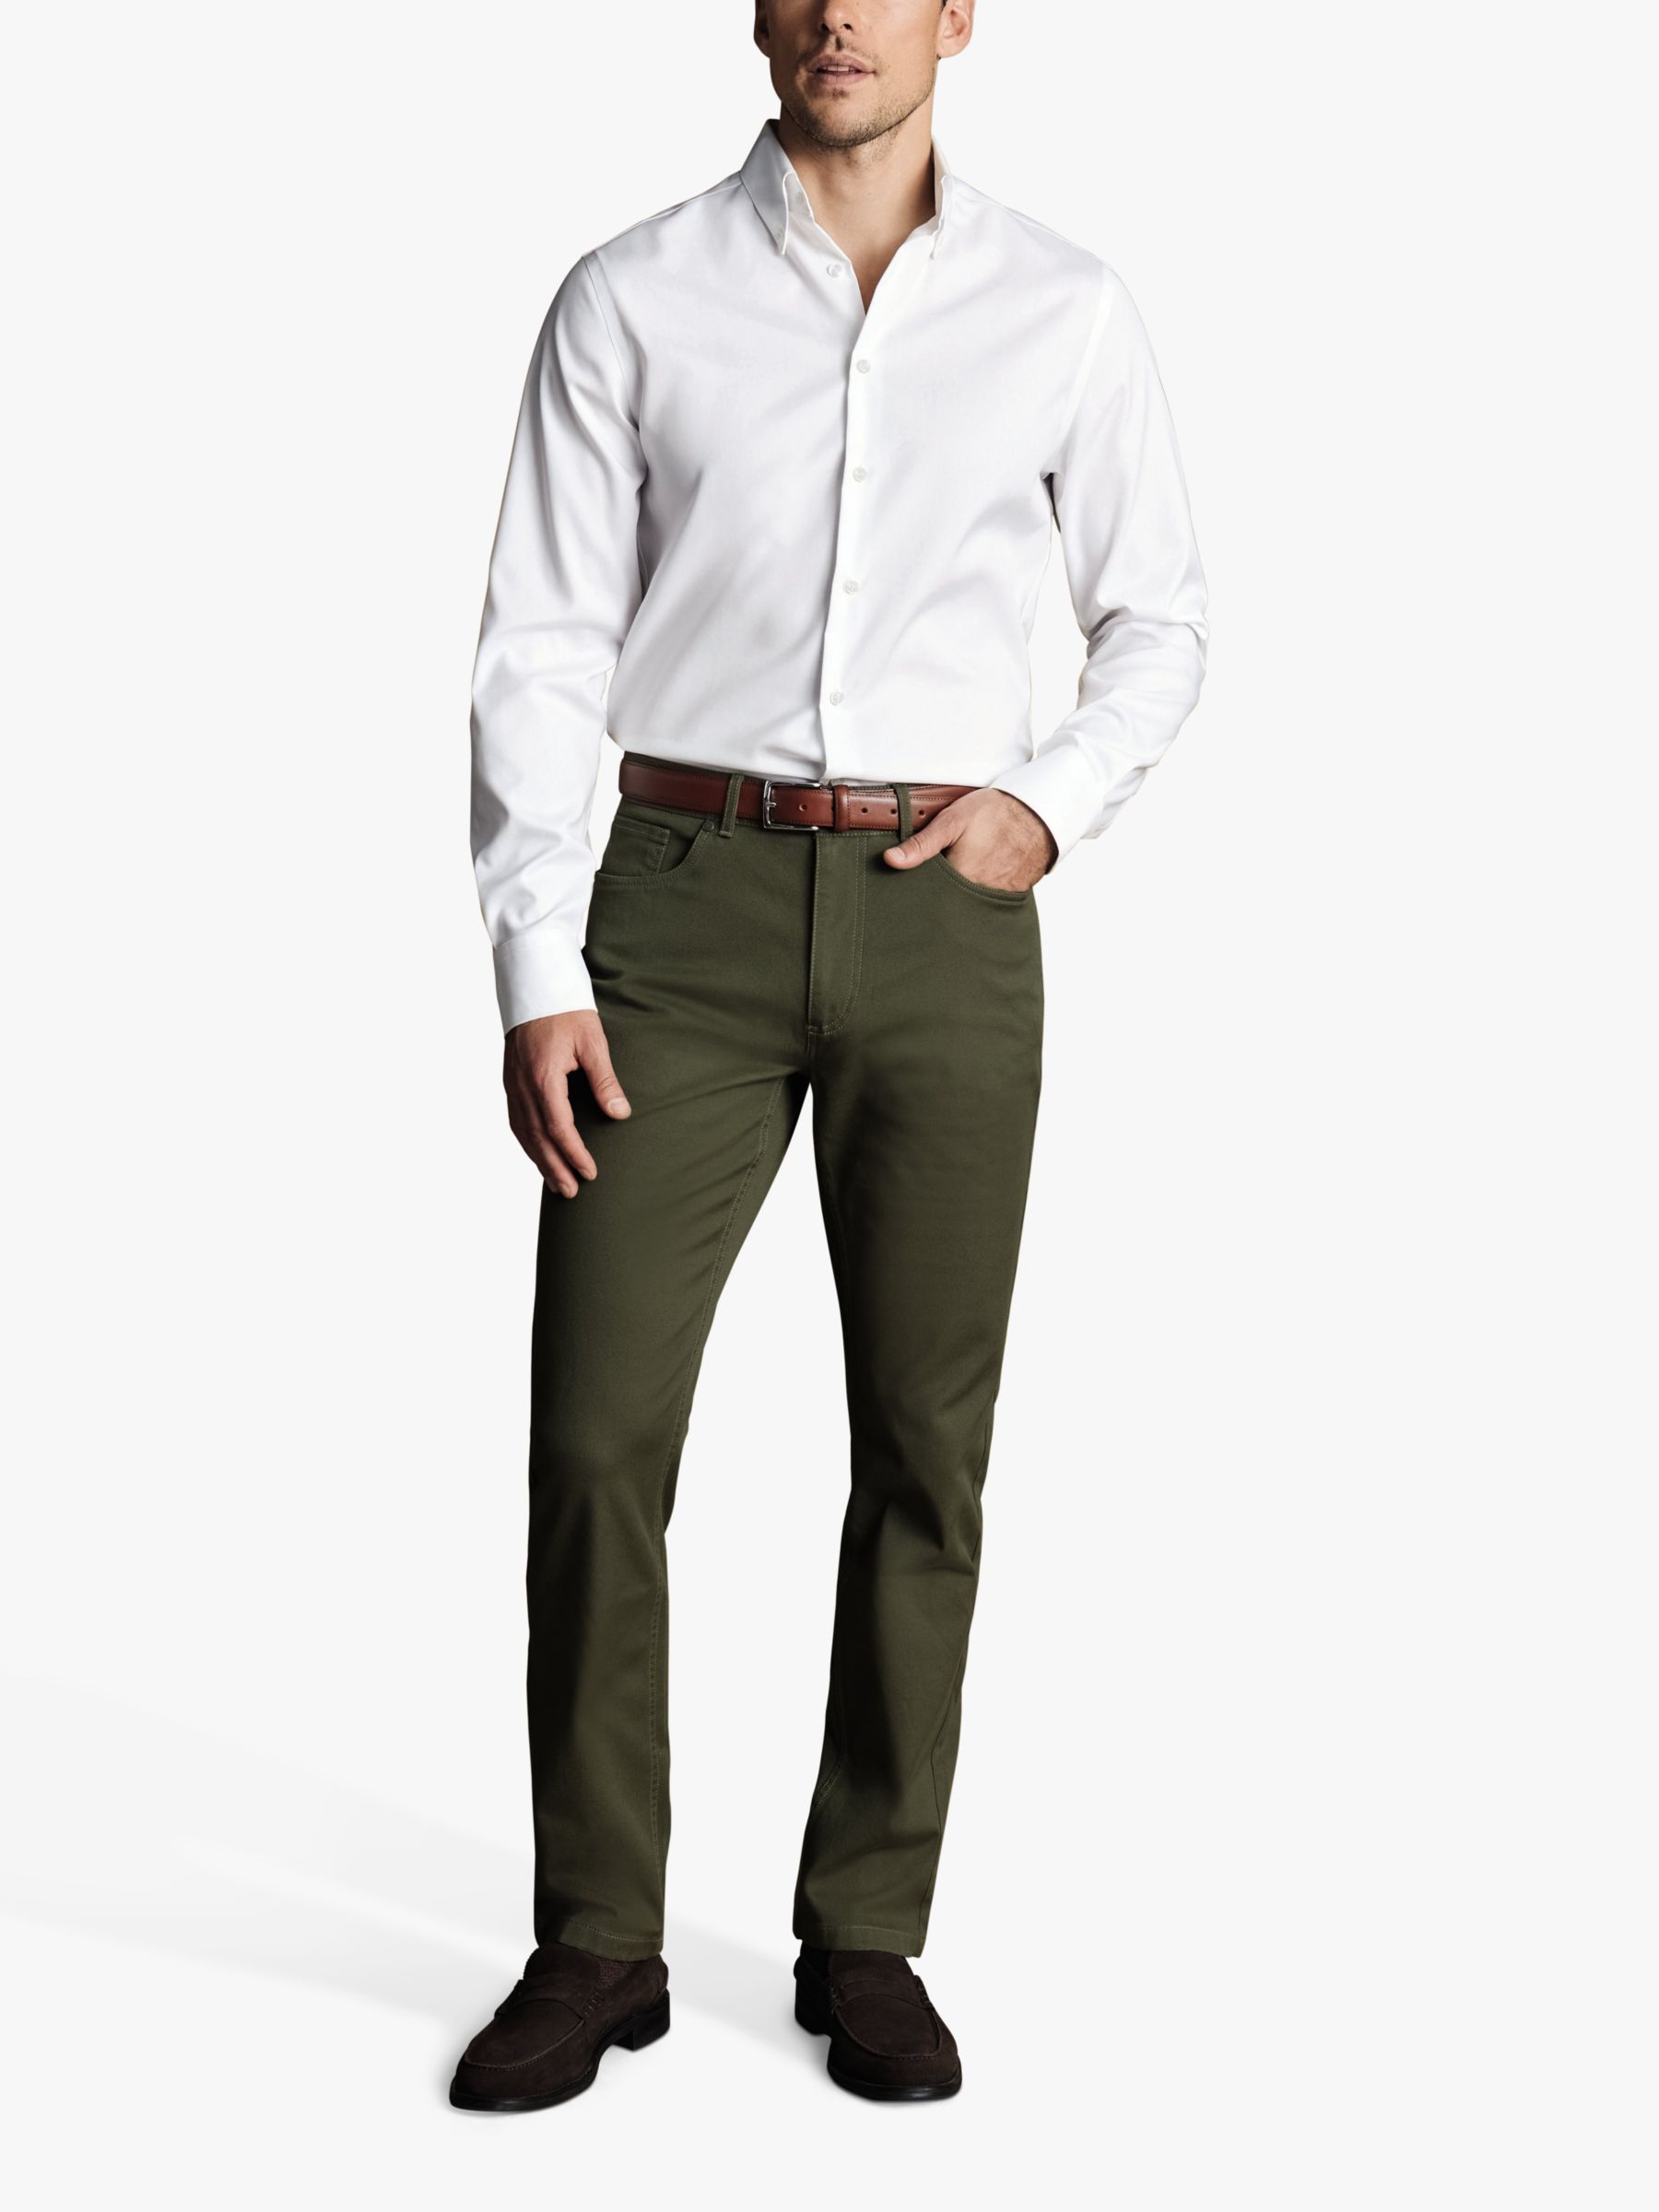 Buy Charles Tyrwhitt Classic Fit 5 Pocket Twill Jeans Online at johnlewis.com